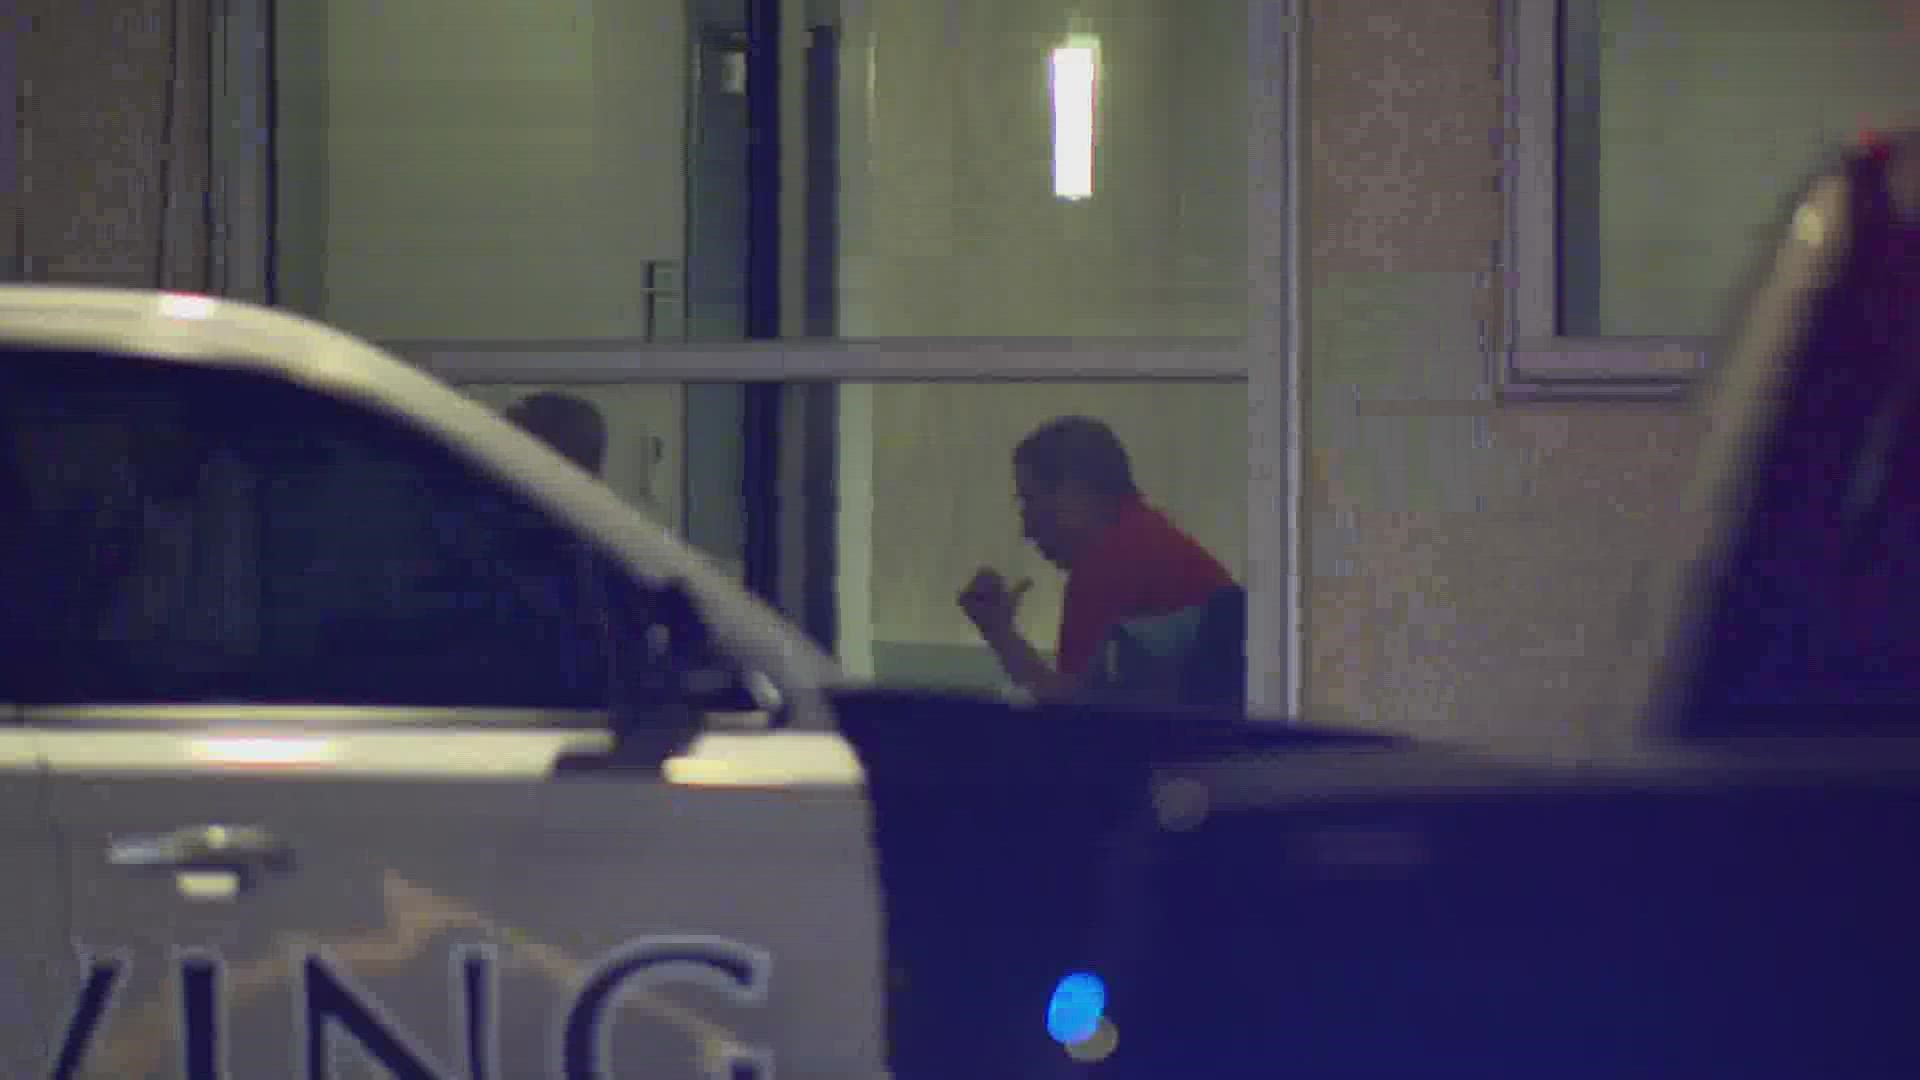 During a press conference Wednesday evening, Irving Police said the person was a patient in the emergency room at the hospital and had a handgun.